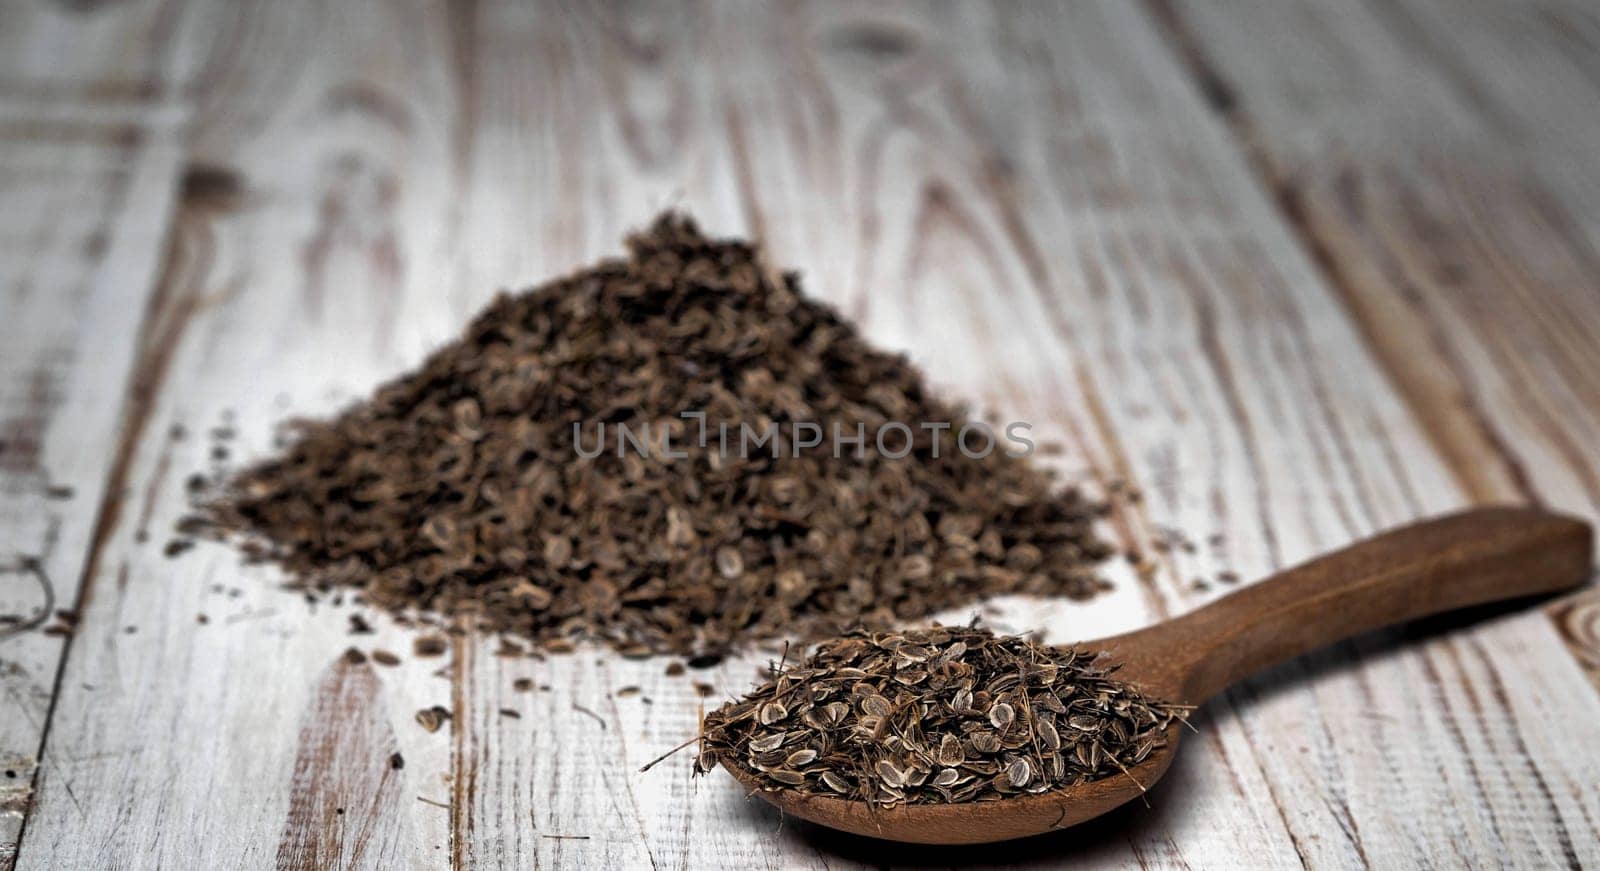 Natural wooden background with a spoon and a pile of dried dill seeds. Plant, food and medical themes. The concept of the usefulness of dill